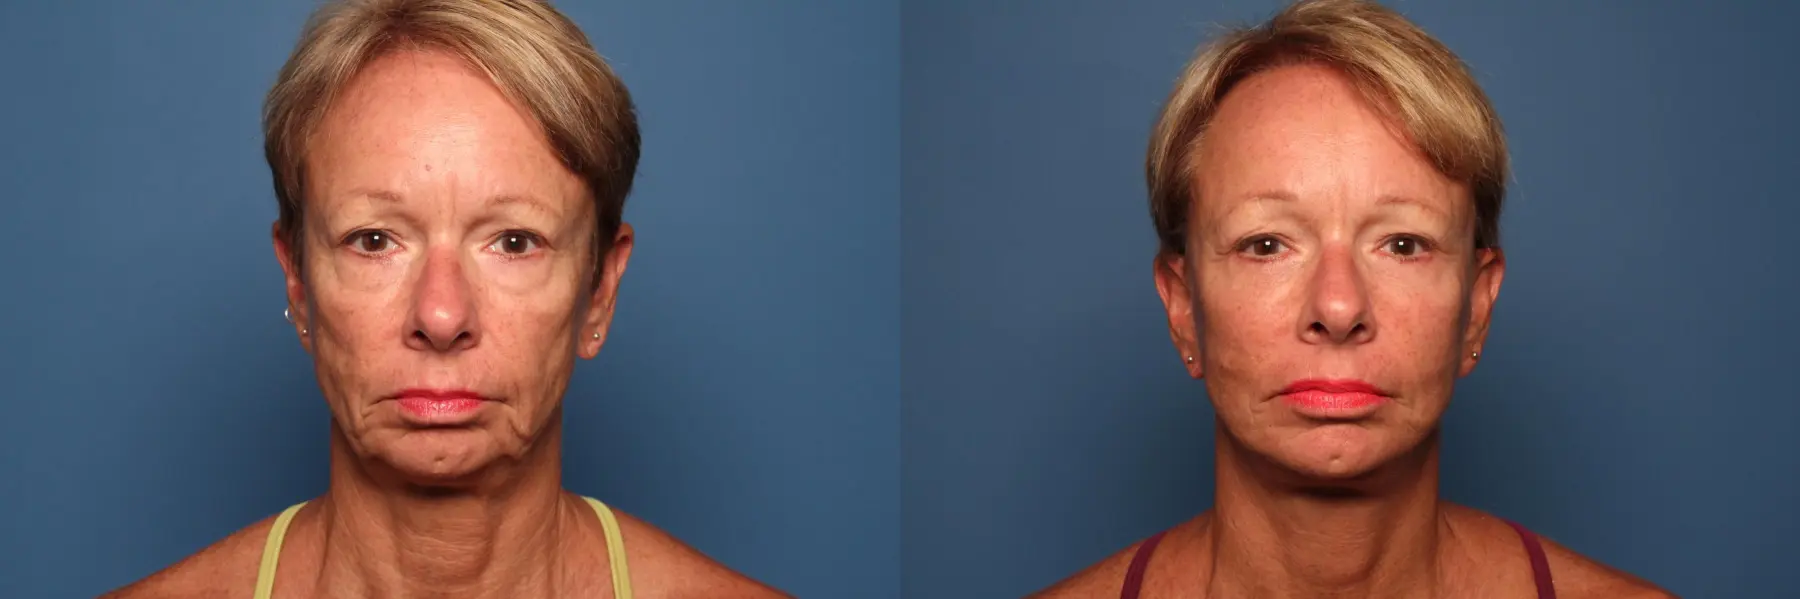 Mini Facelift: Patient 4 - Before and After  